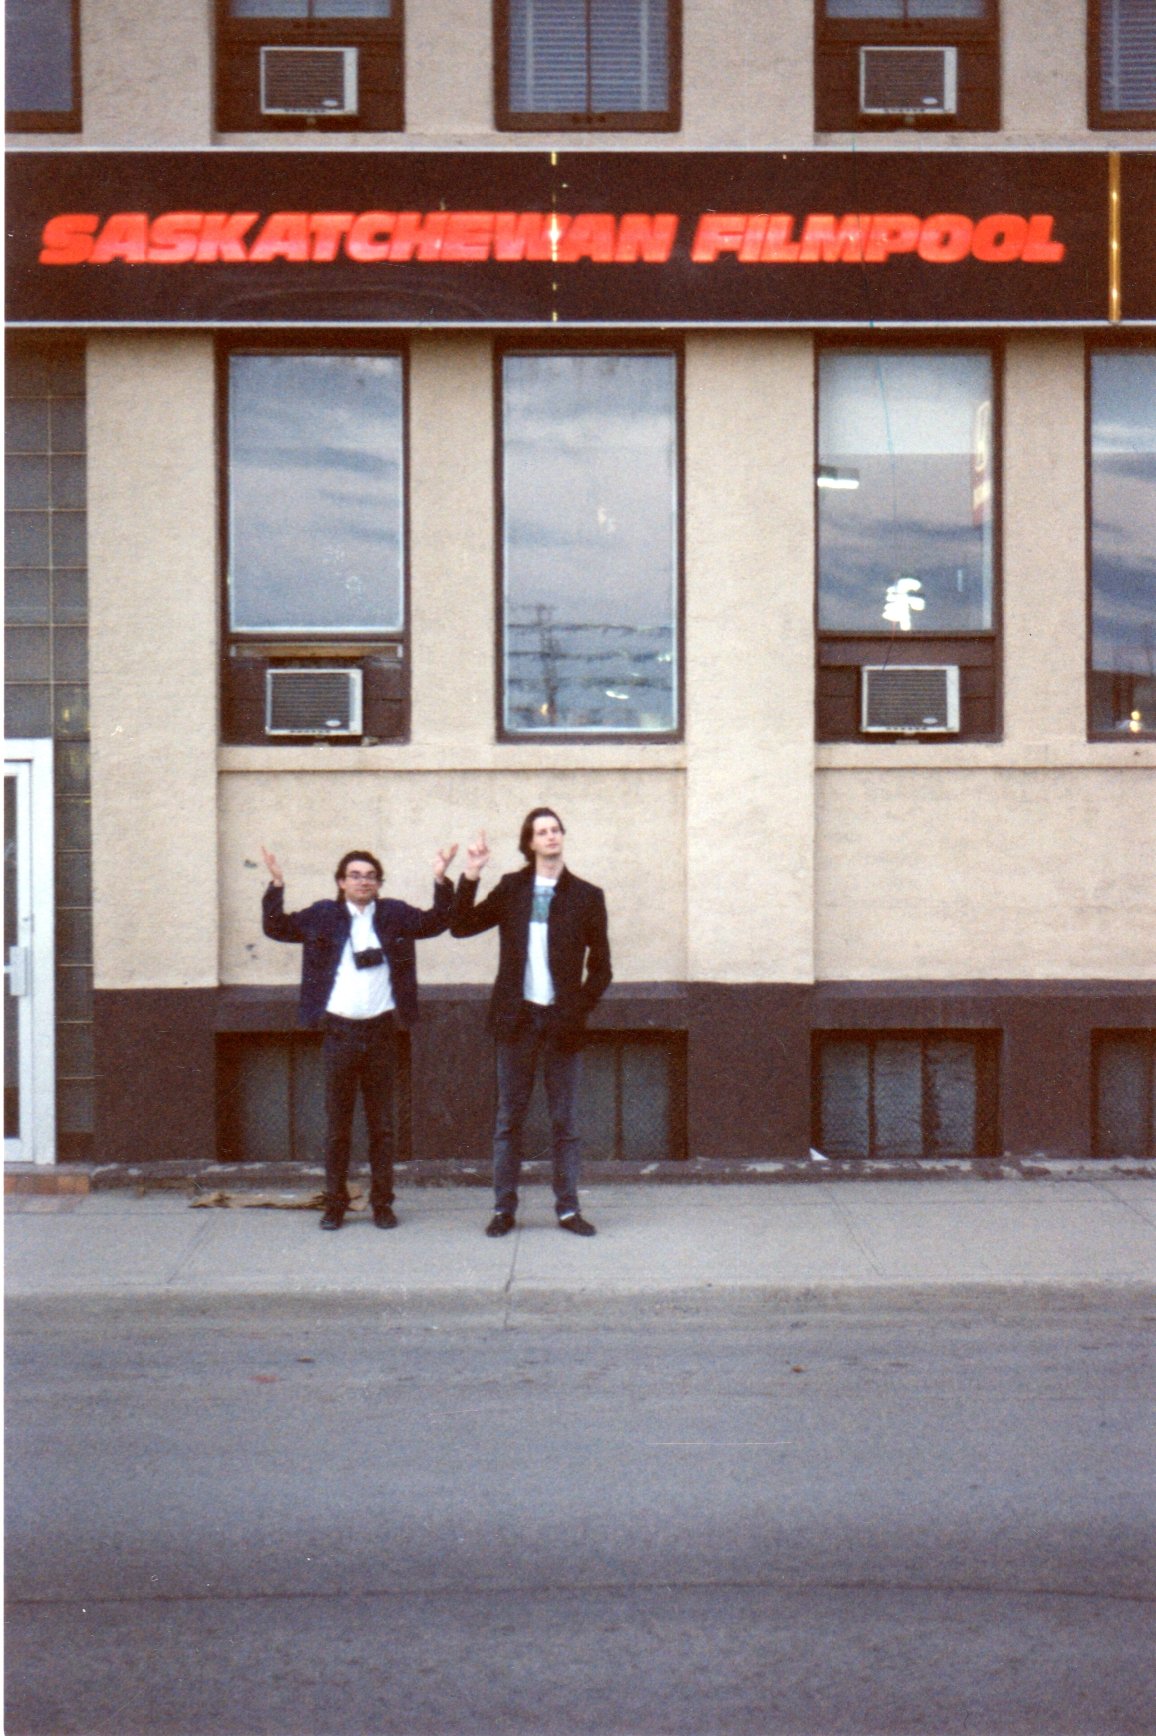 Filmpool members outside of Broad St. location. | Source: Filmpool archive